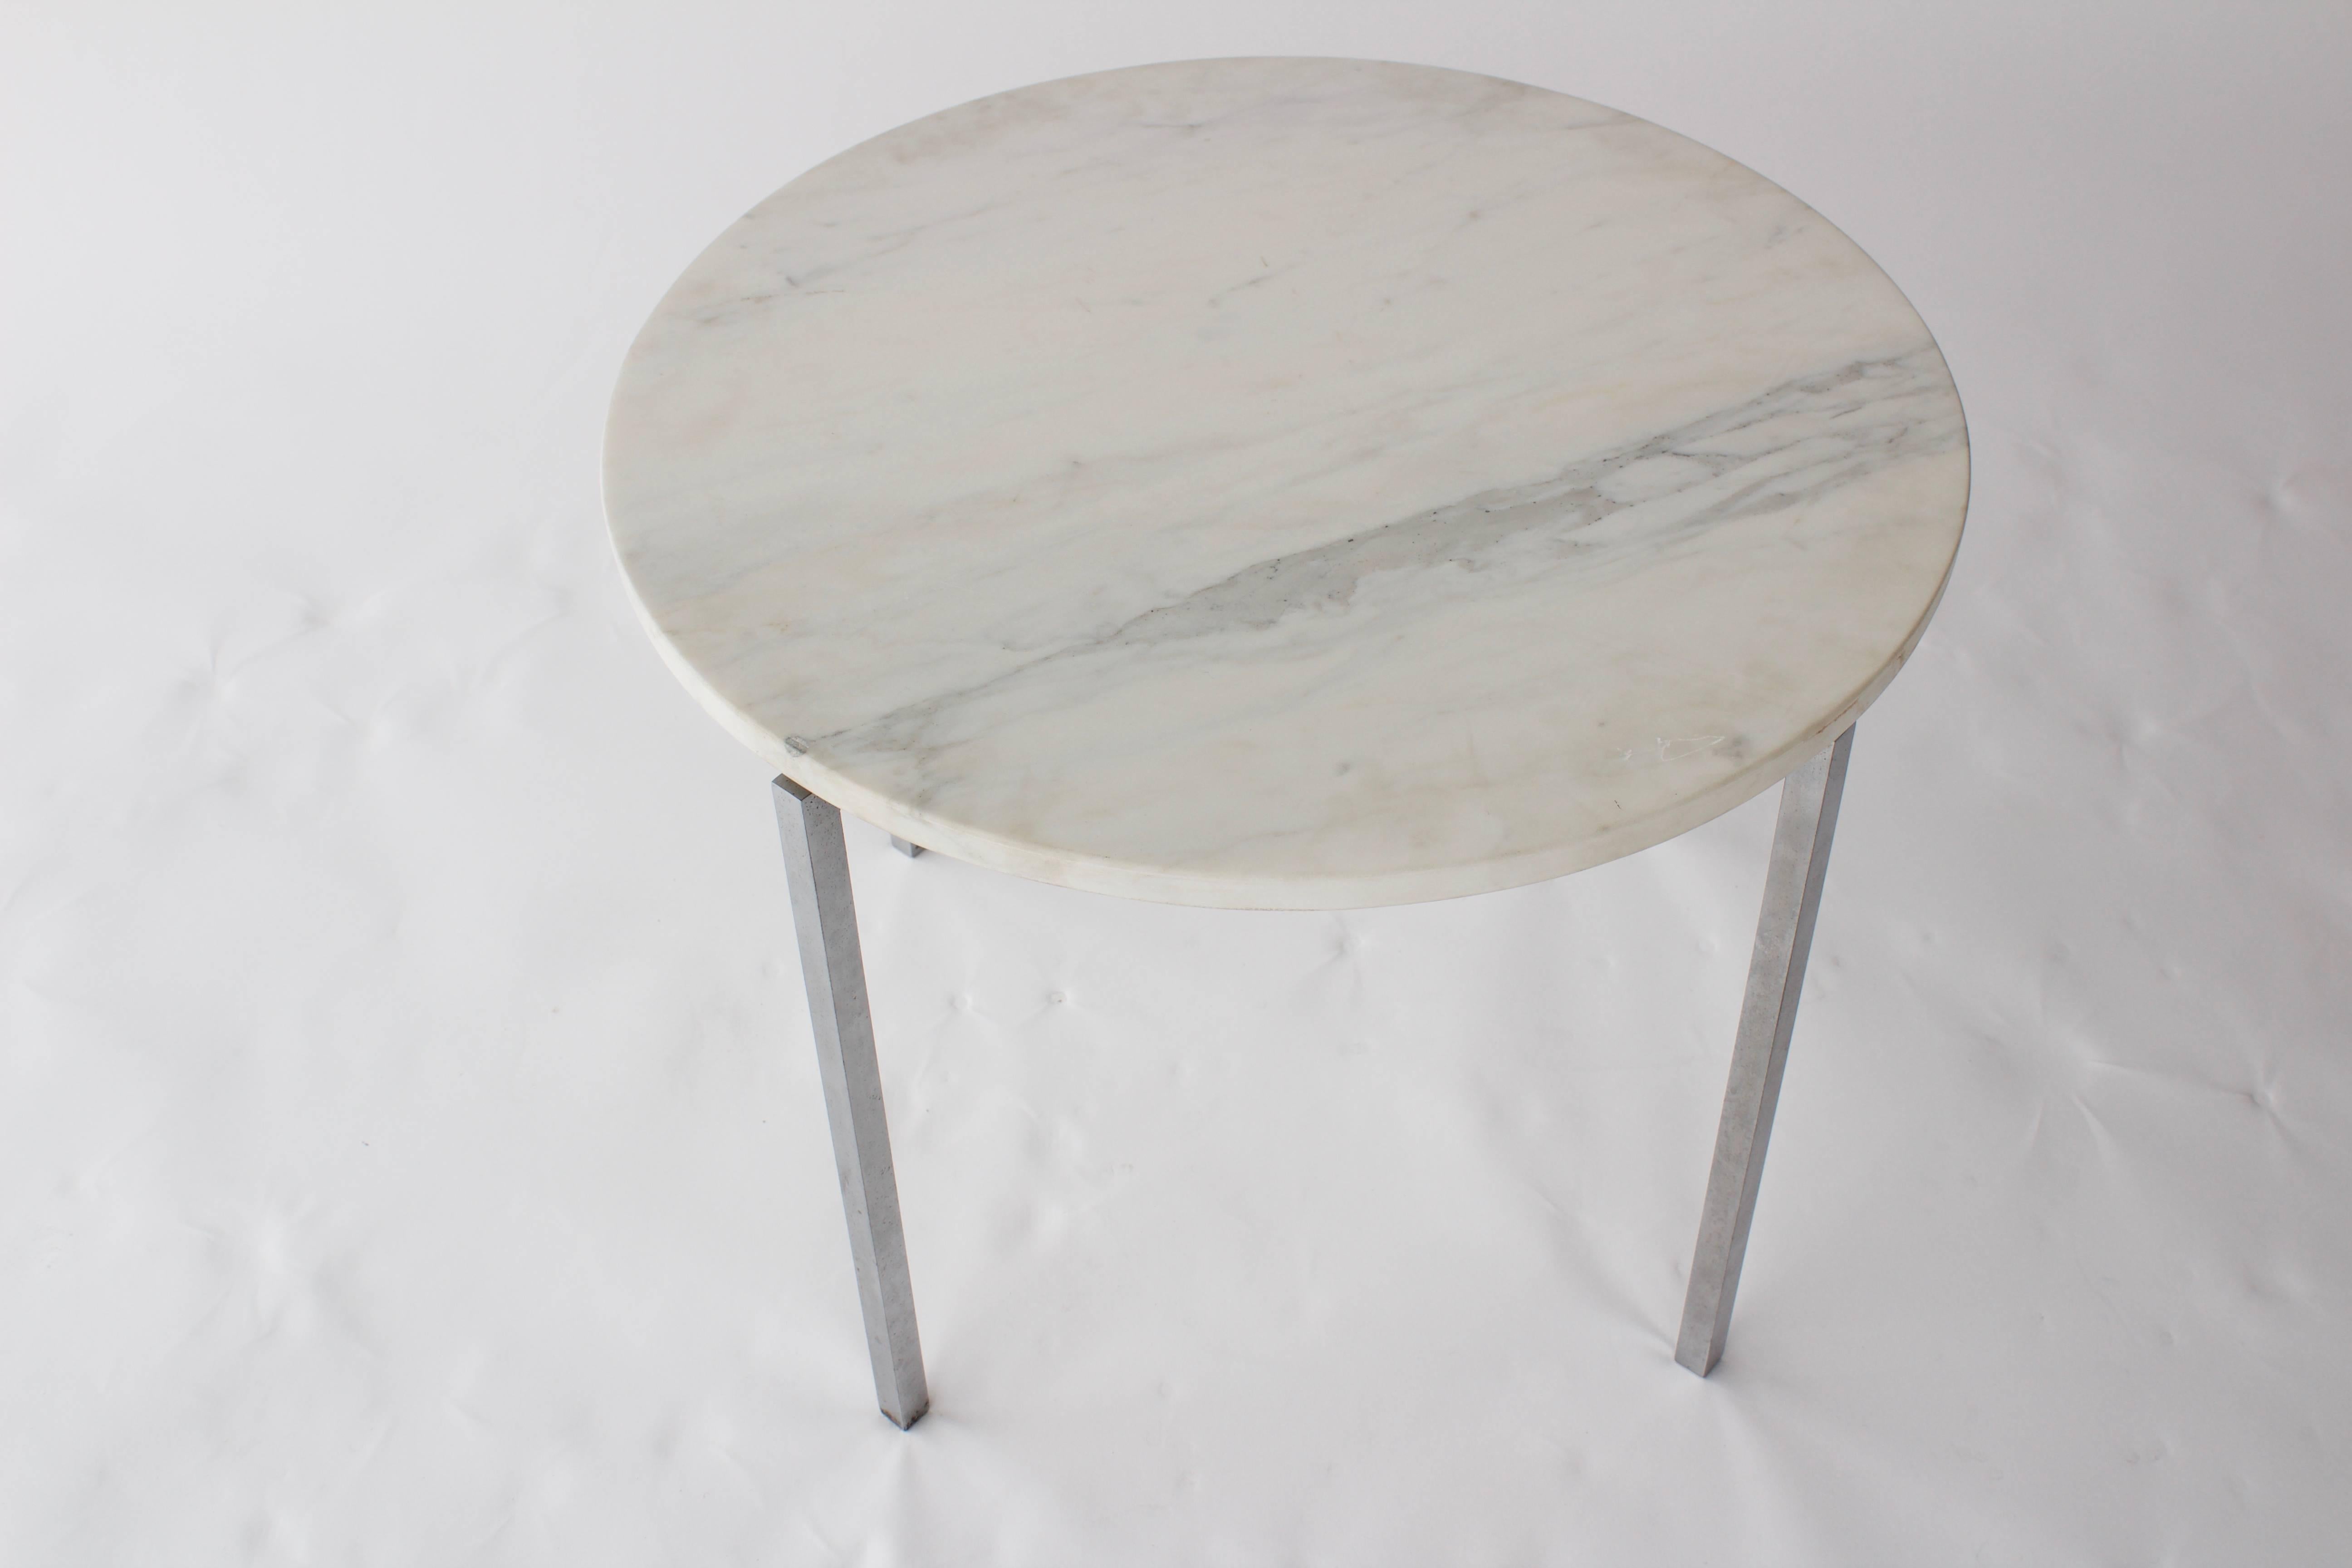 Simple, modern side table with marble and chrome steel base, attributed to Knoll, circa 1970s.